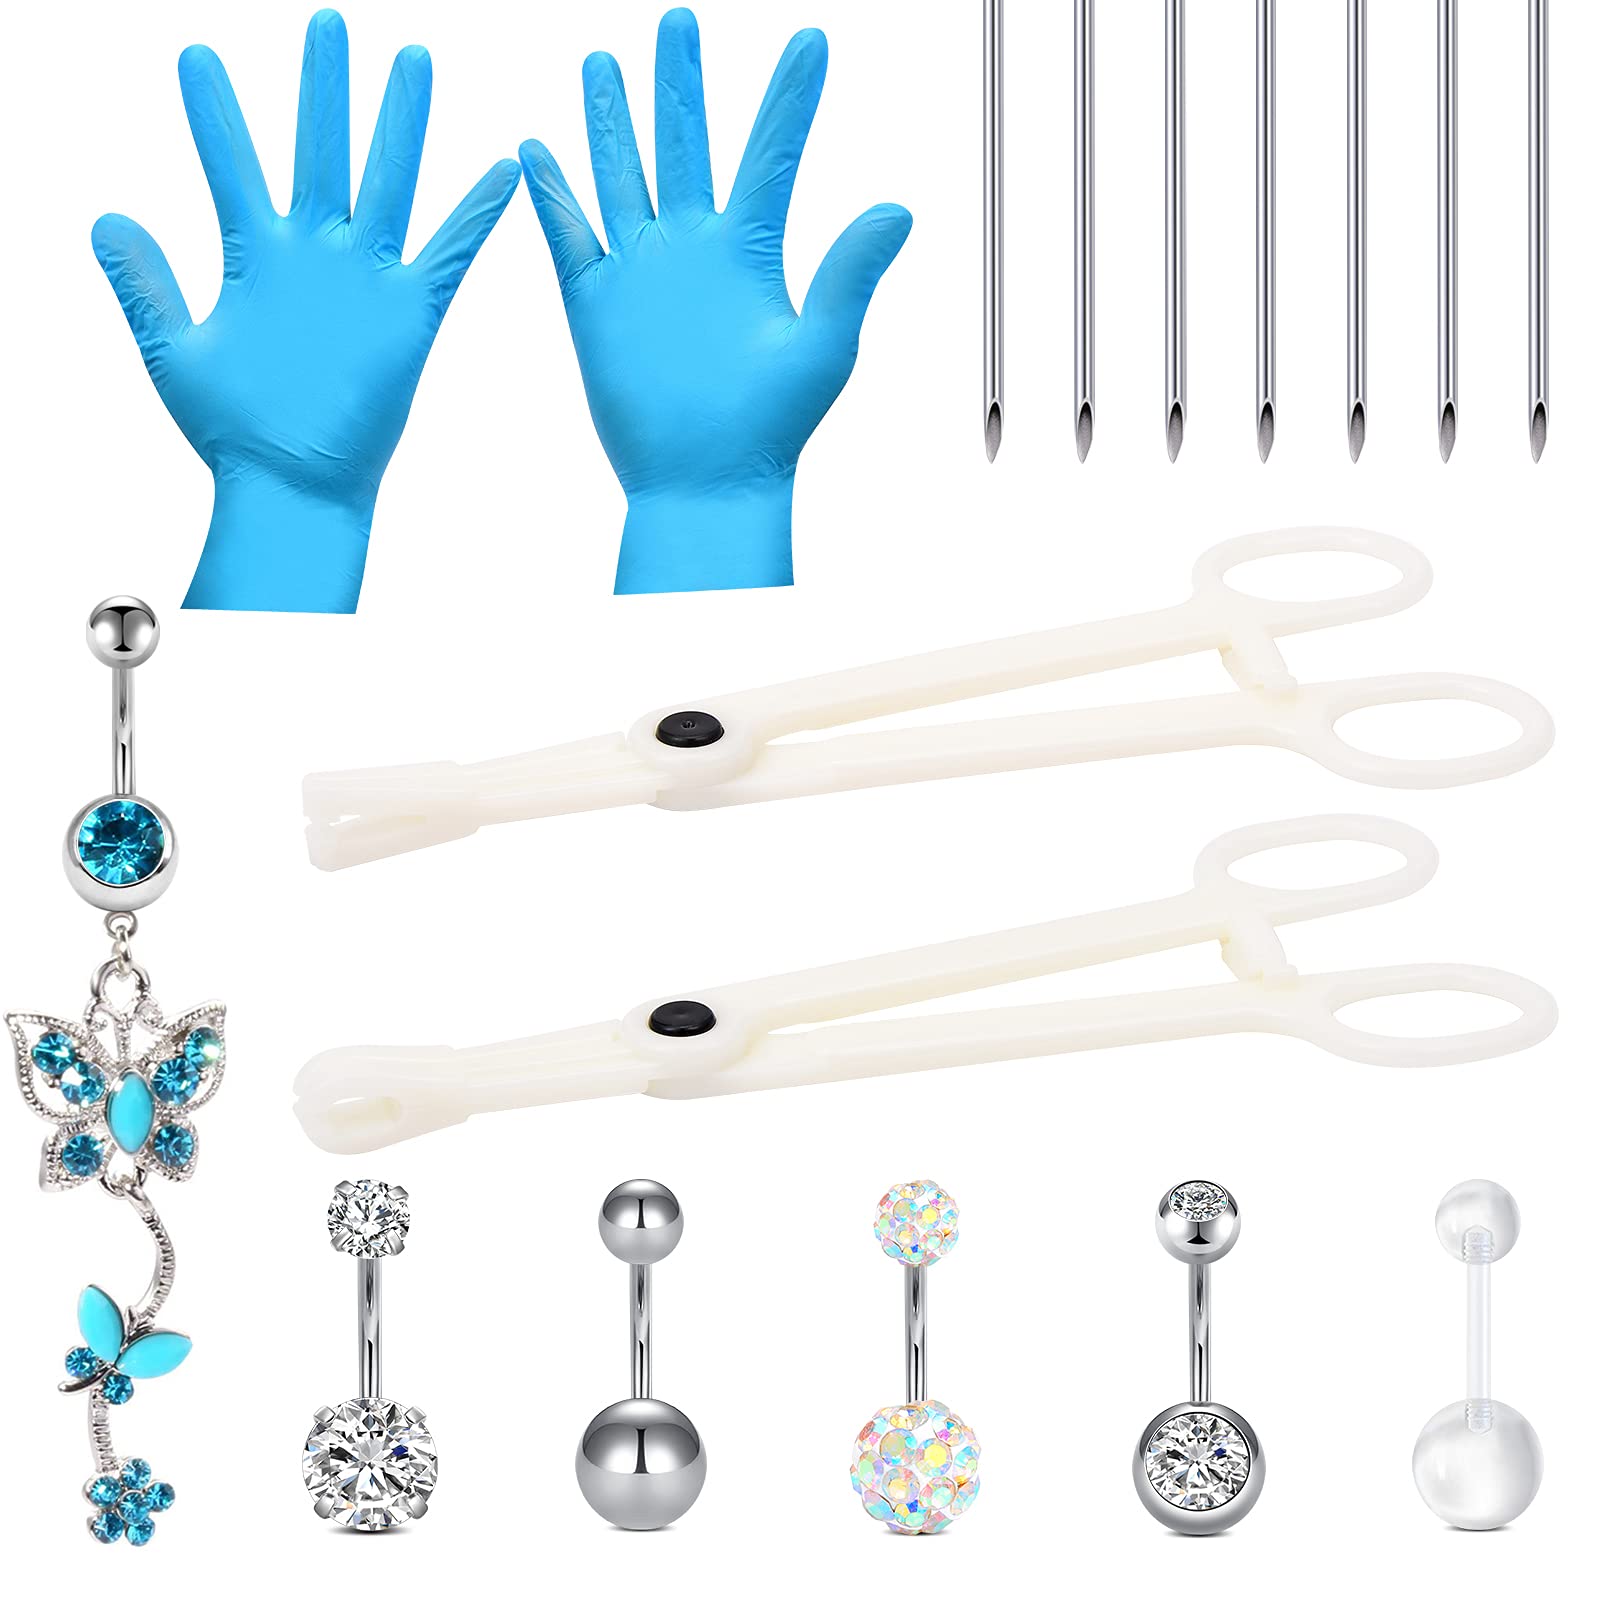 16PCS Belly Button Piercing Kit,14G Body Piercing Needles and